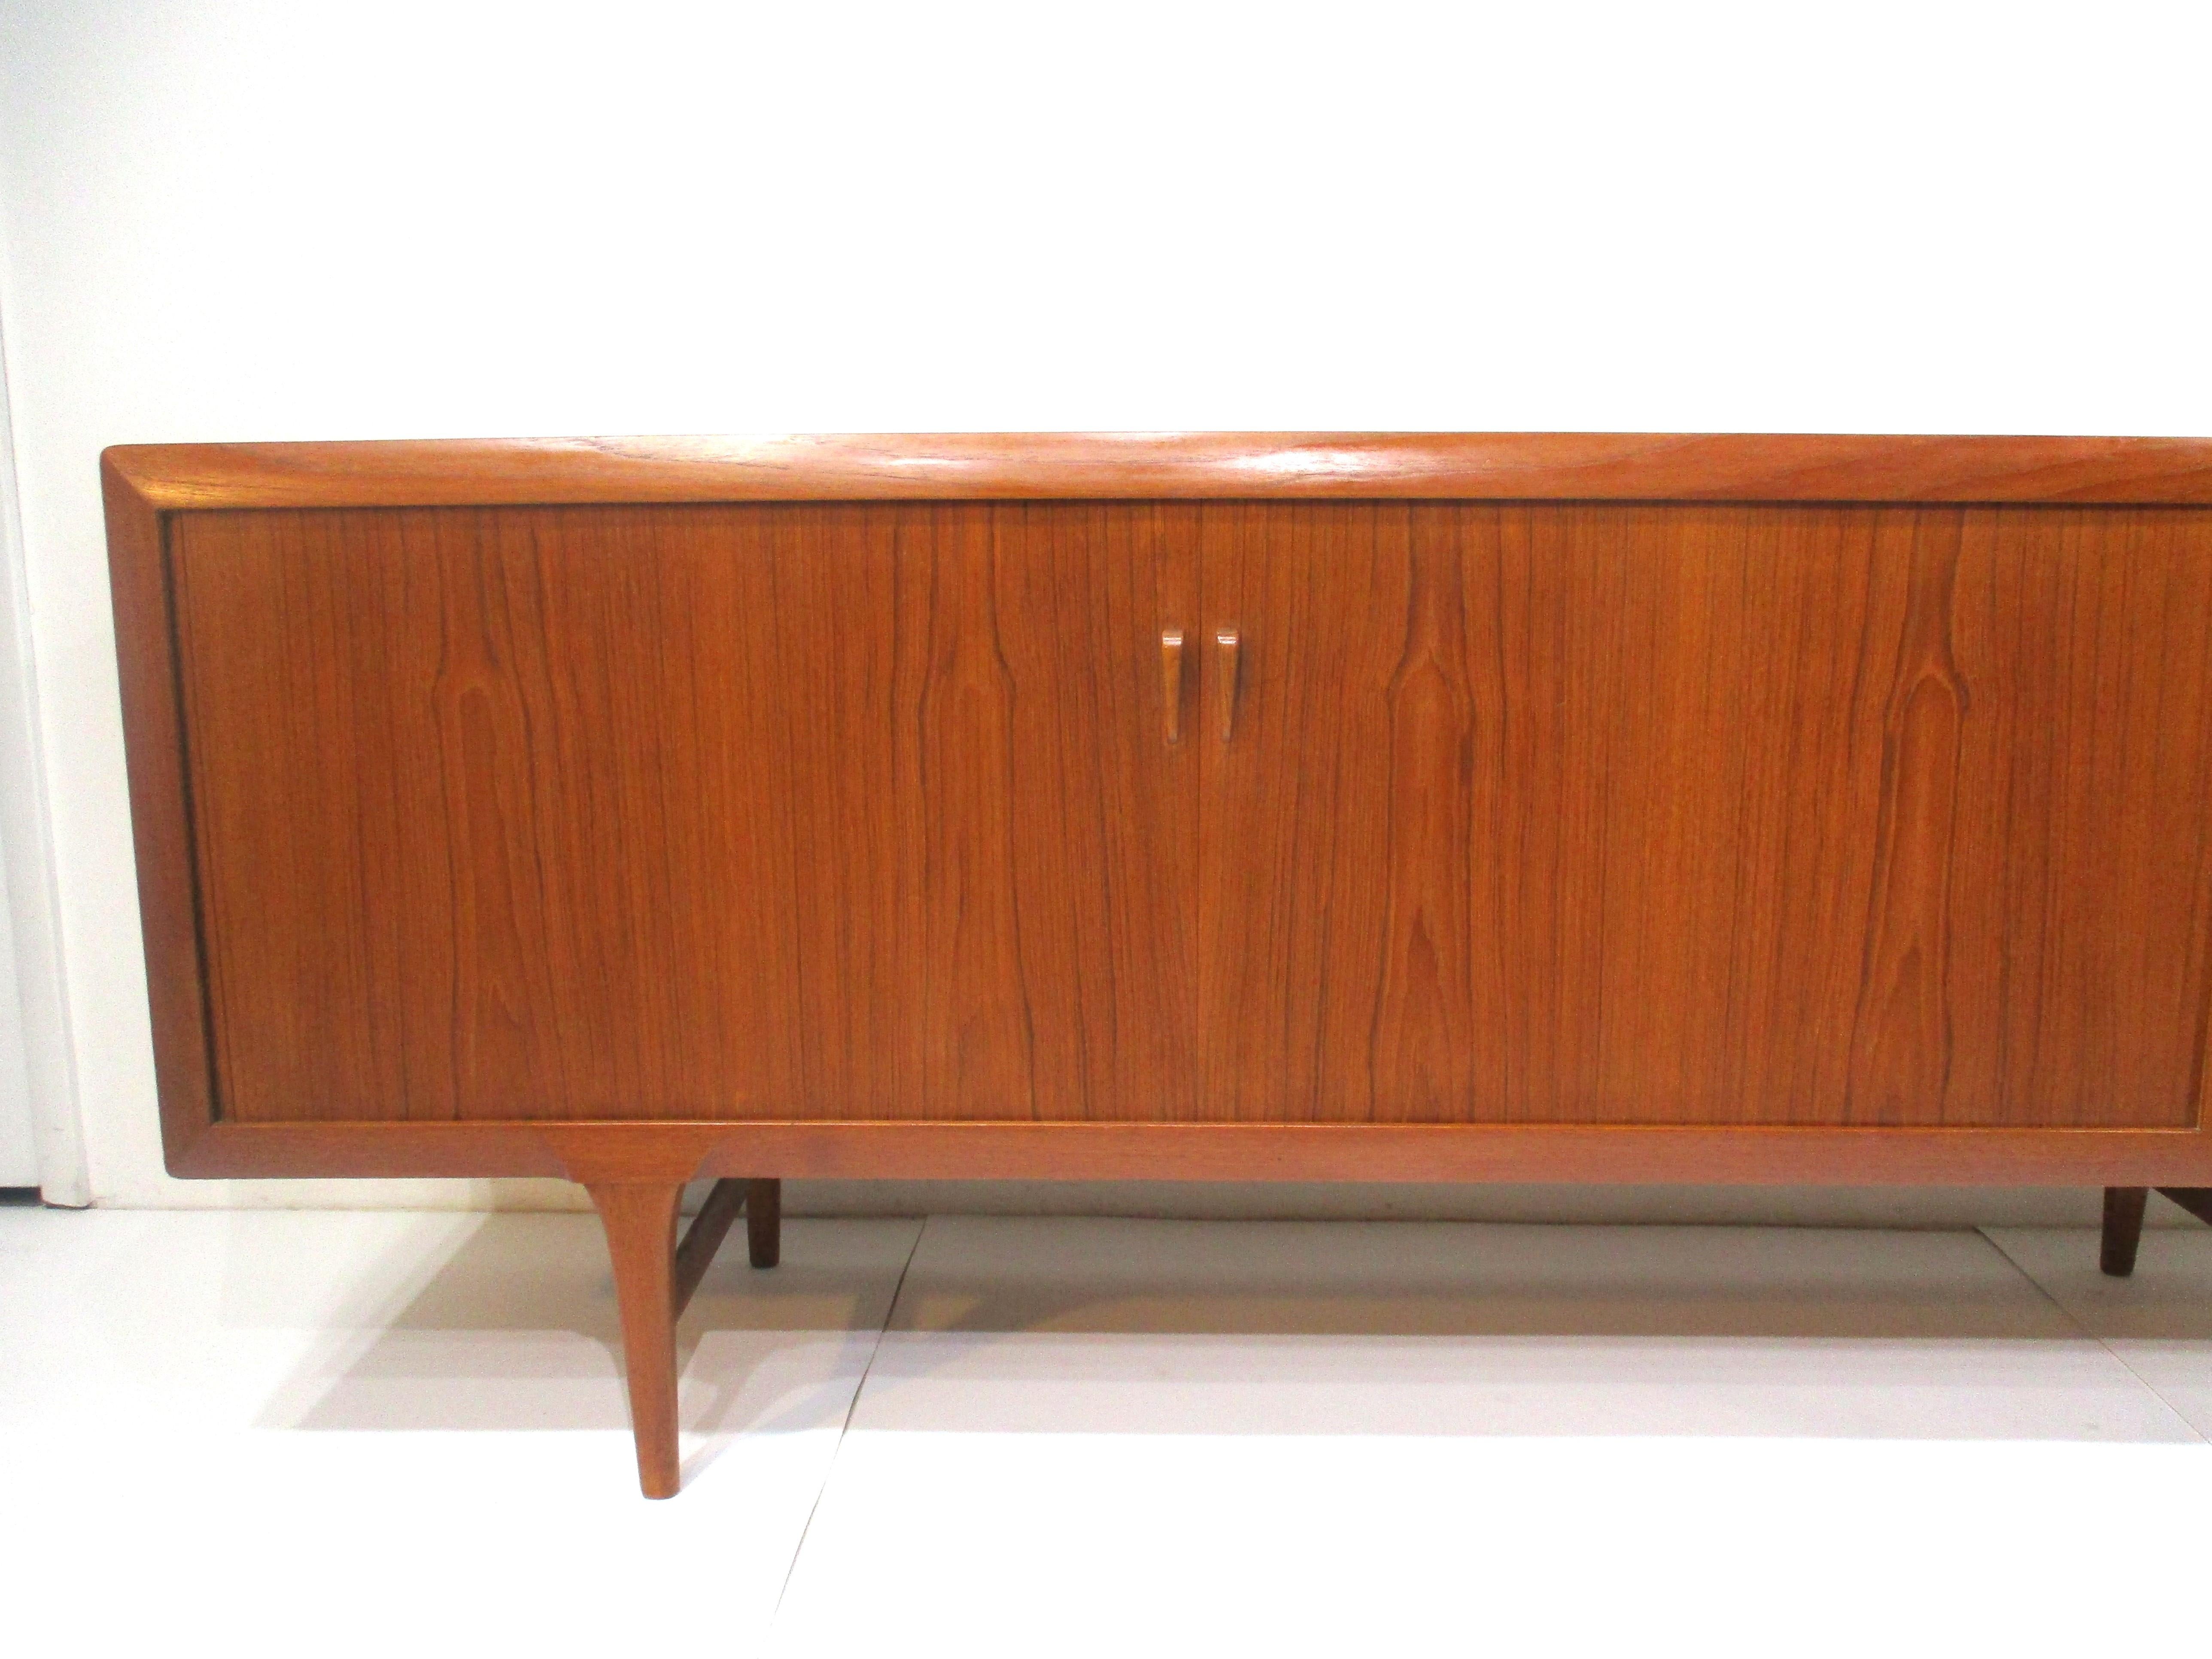 A very well crafted teak wood credenza / server fashioned by the early cabinetmakers in Denmark . Nice soft rolled edges , double tambor doors and sculptural pulls to the fronts of the drawers with the top one having a sliding tray all in keeping